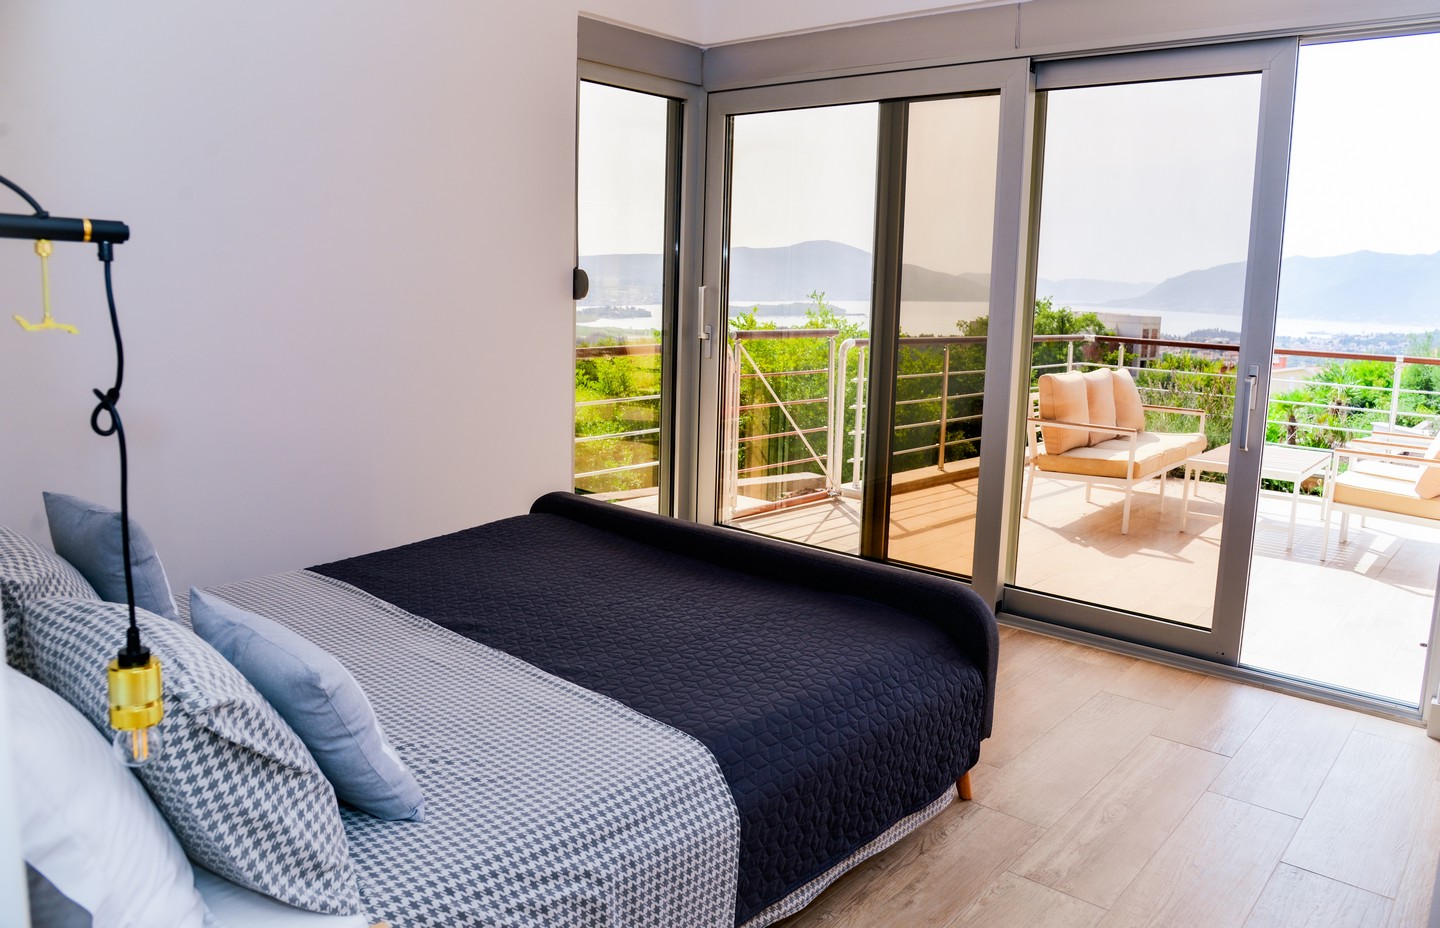 Tivat Heights Residence, Montenegro - Master bedroom and panoramic terrace sea view Tivat Bay